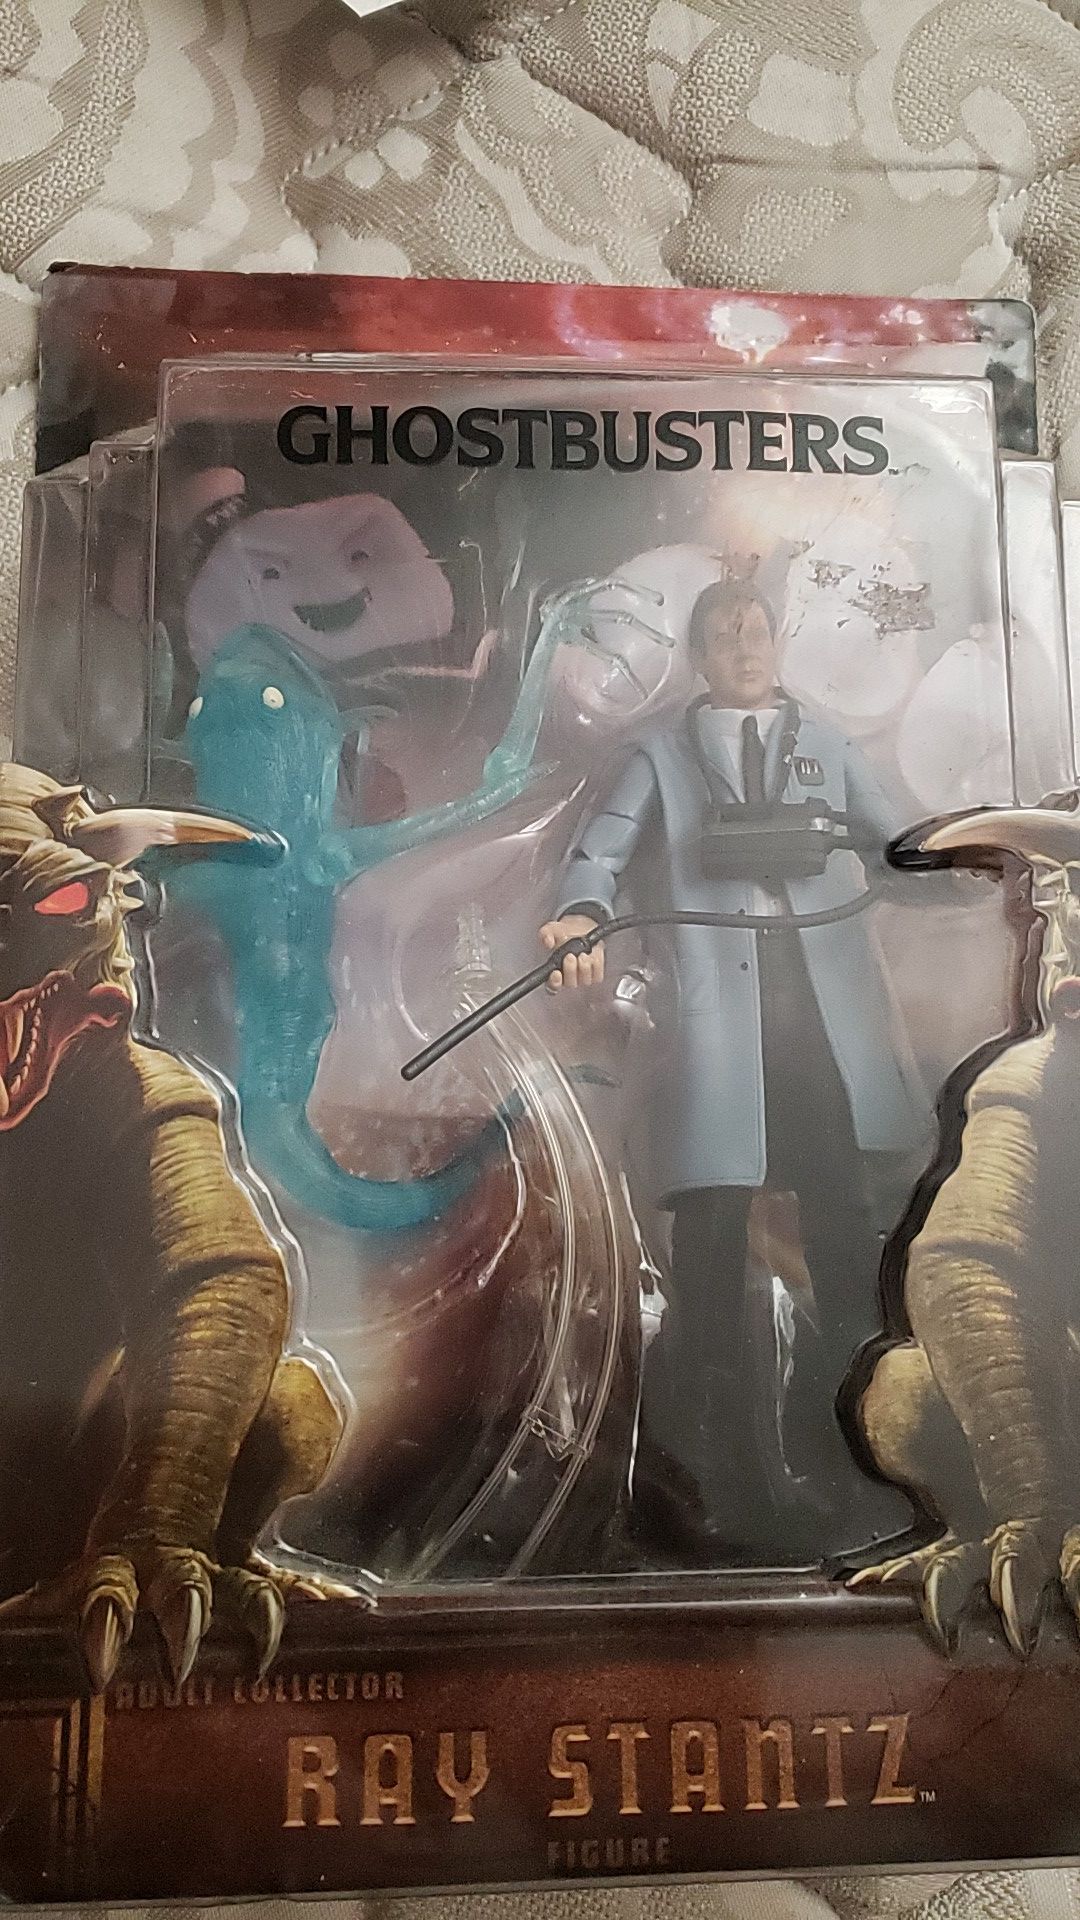 Collectors edition 6 inch Ray Stantz Ghostbusters action figure